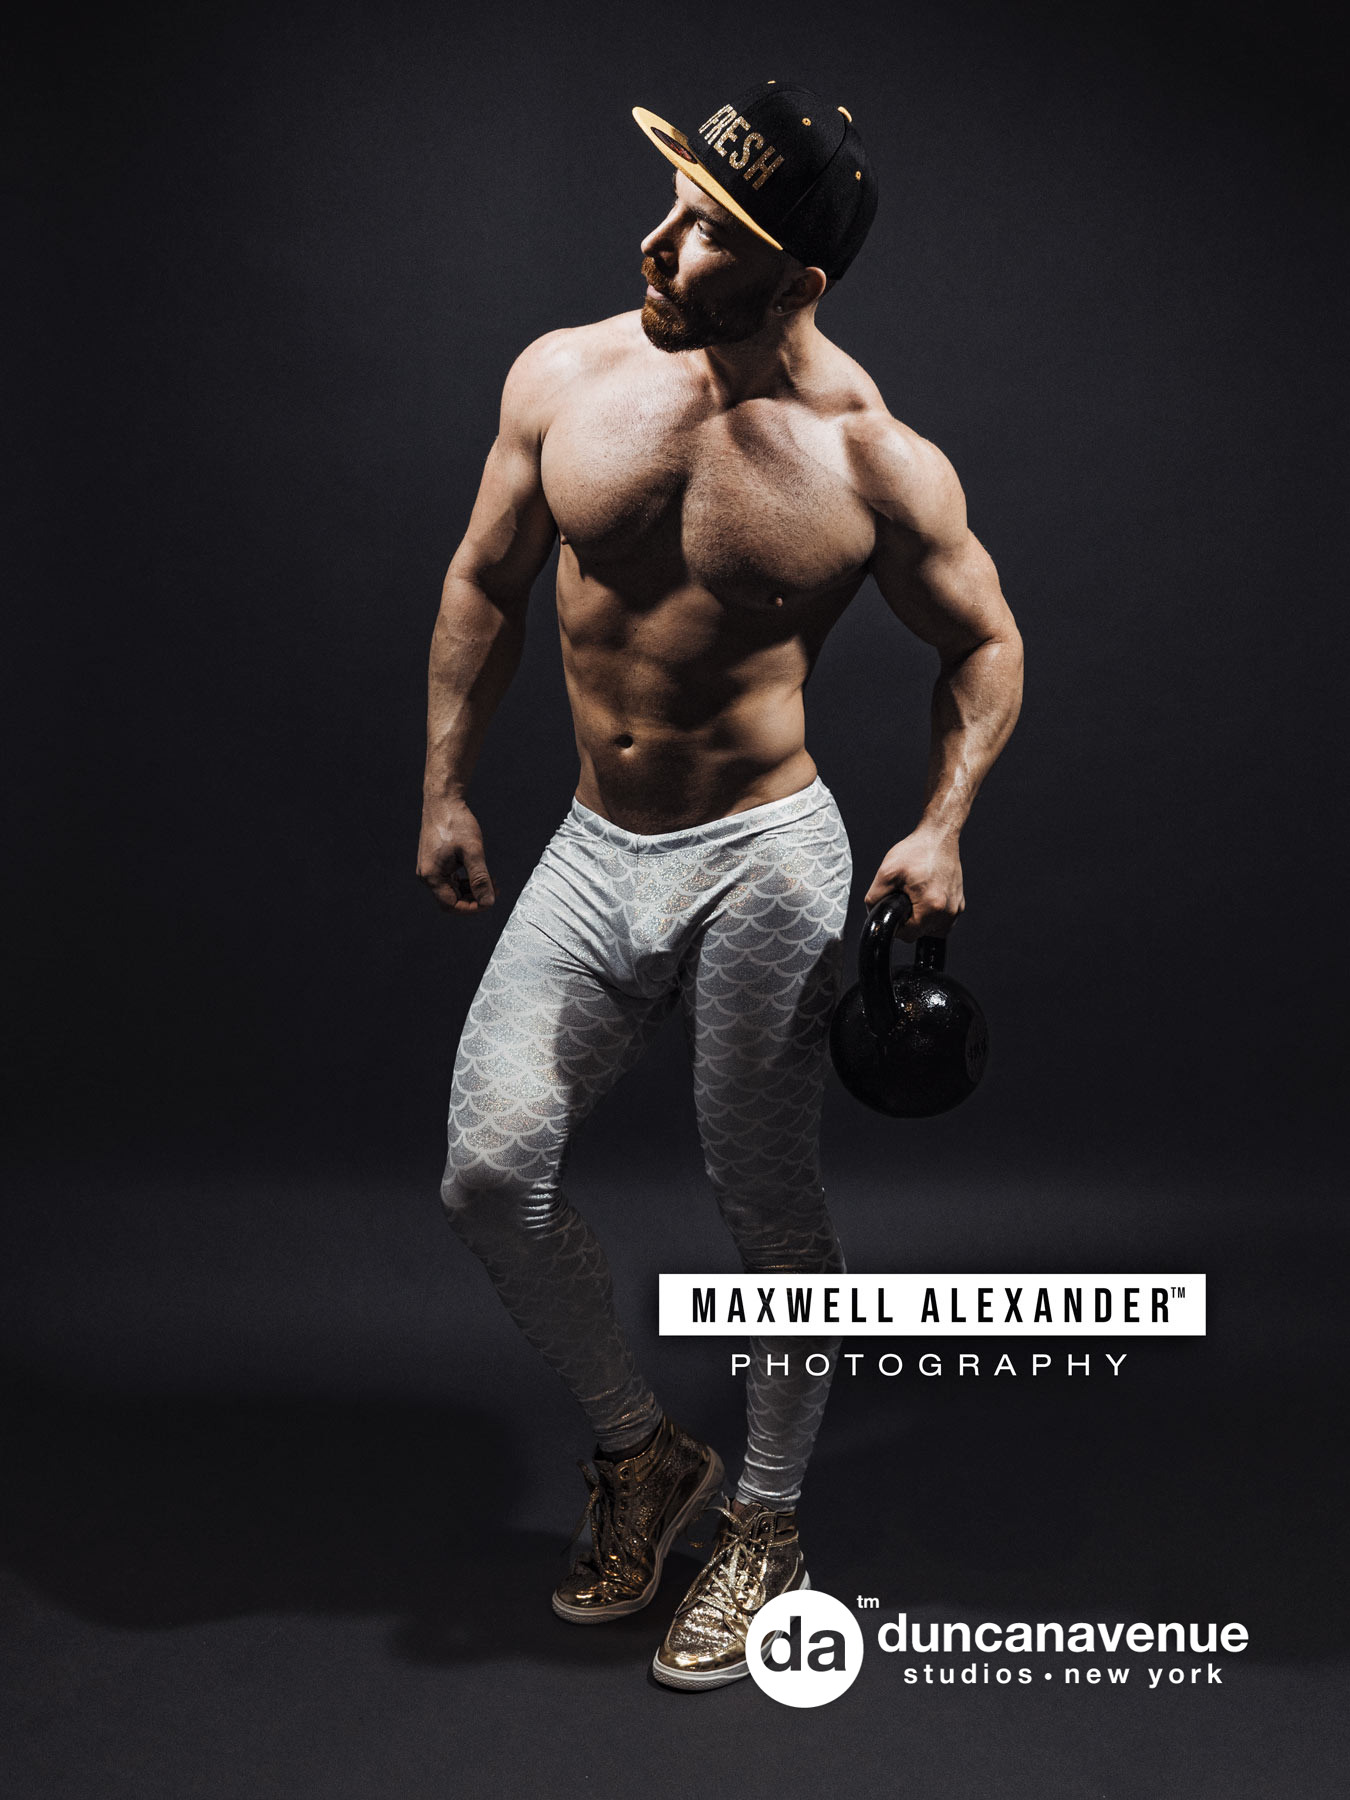 Top 8 Reasons Why You Need to Include Kettlebells in Your Workout Routine – Presented by “Kettlebell Training with Bodybuilding Coach Maxwell Alexander” on Amazon Kindle